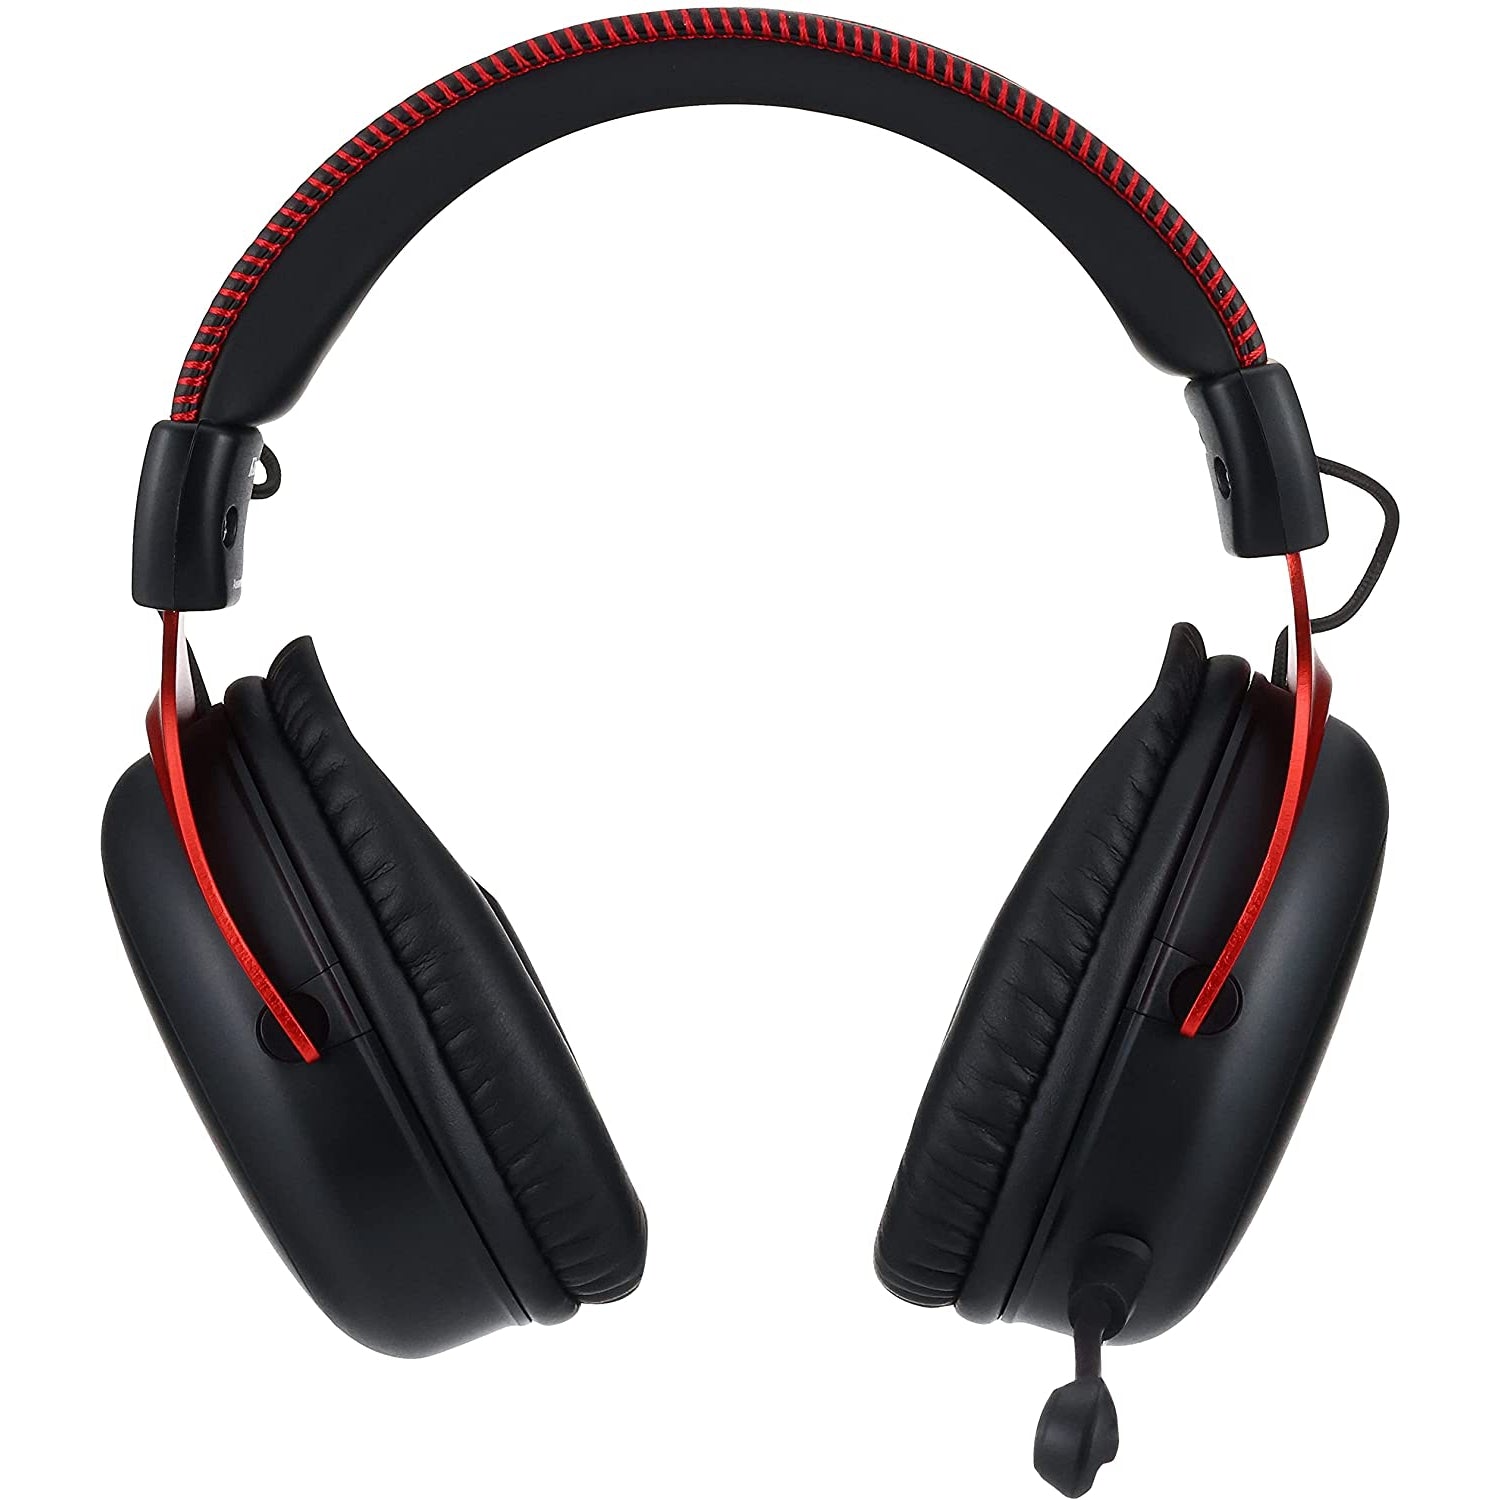 HyperX Cloud II Wireless Gaming Headset for PC, PS4, PS5, Nintendo Switch - Refurbished Excellent